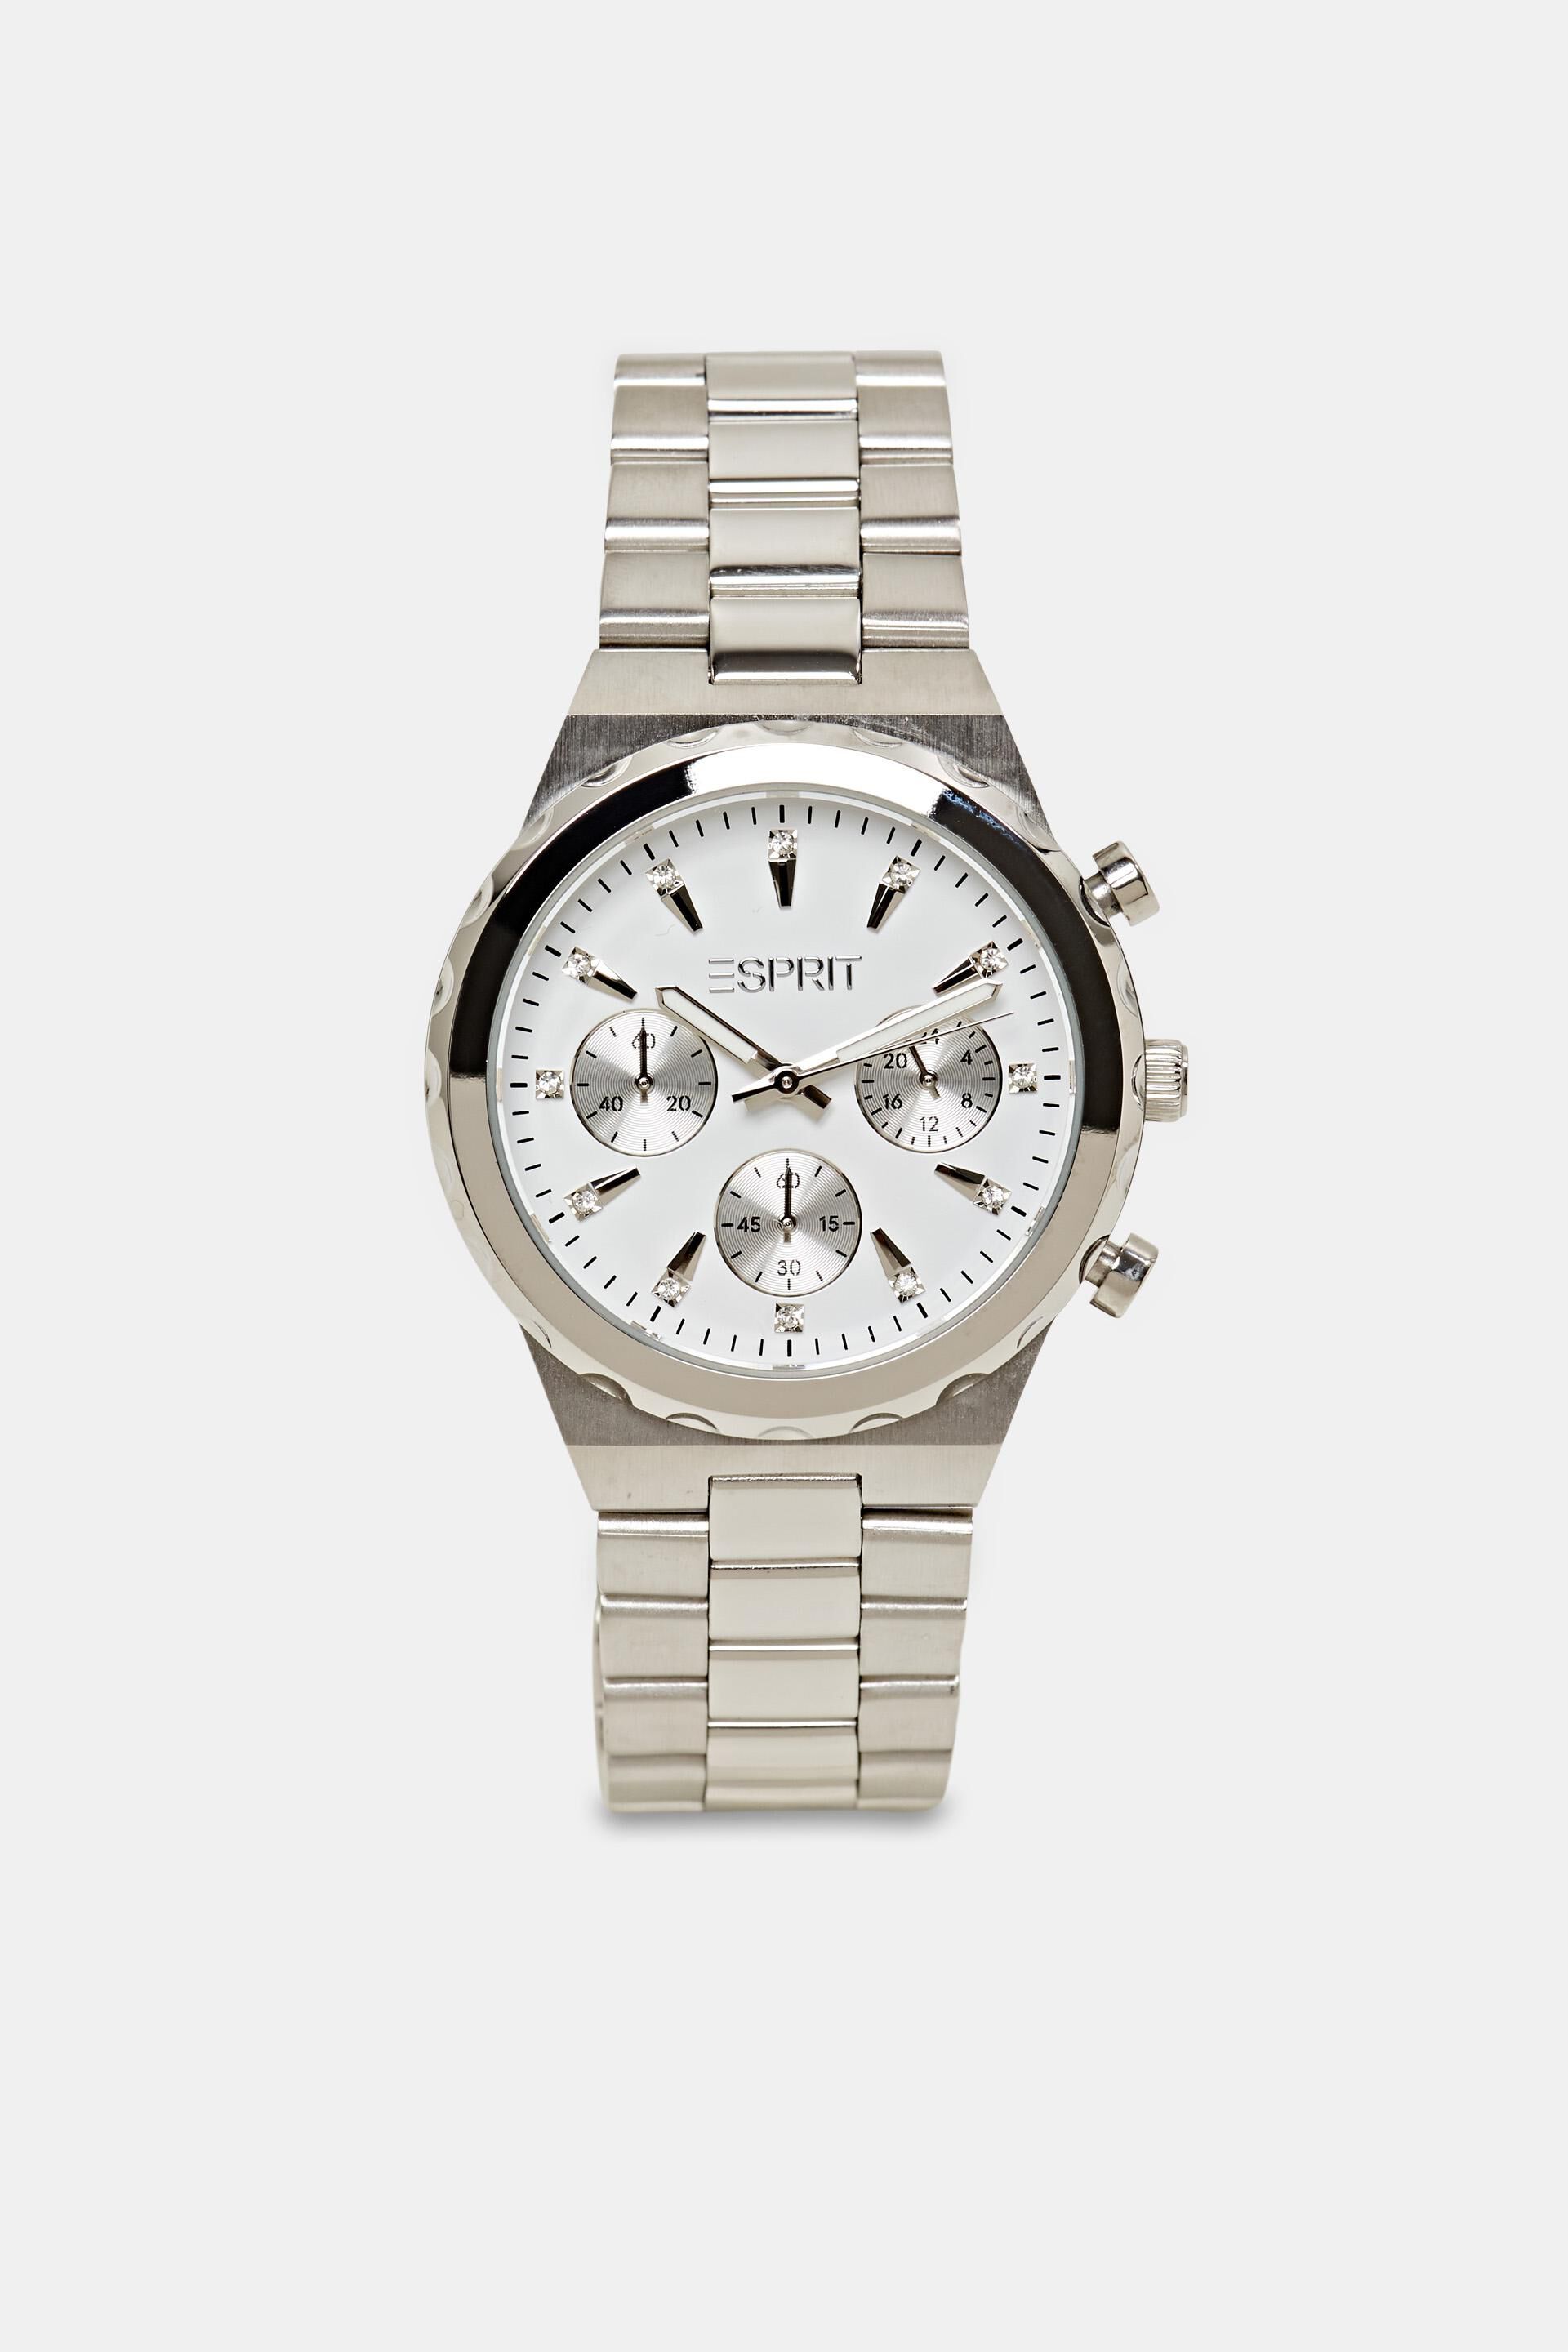 Esprit with bracelet a link Stainless-steel chronograph